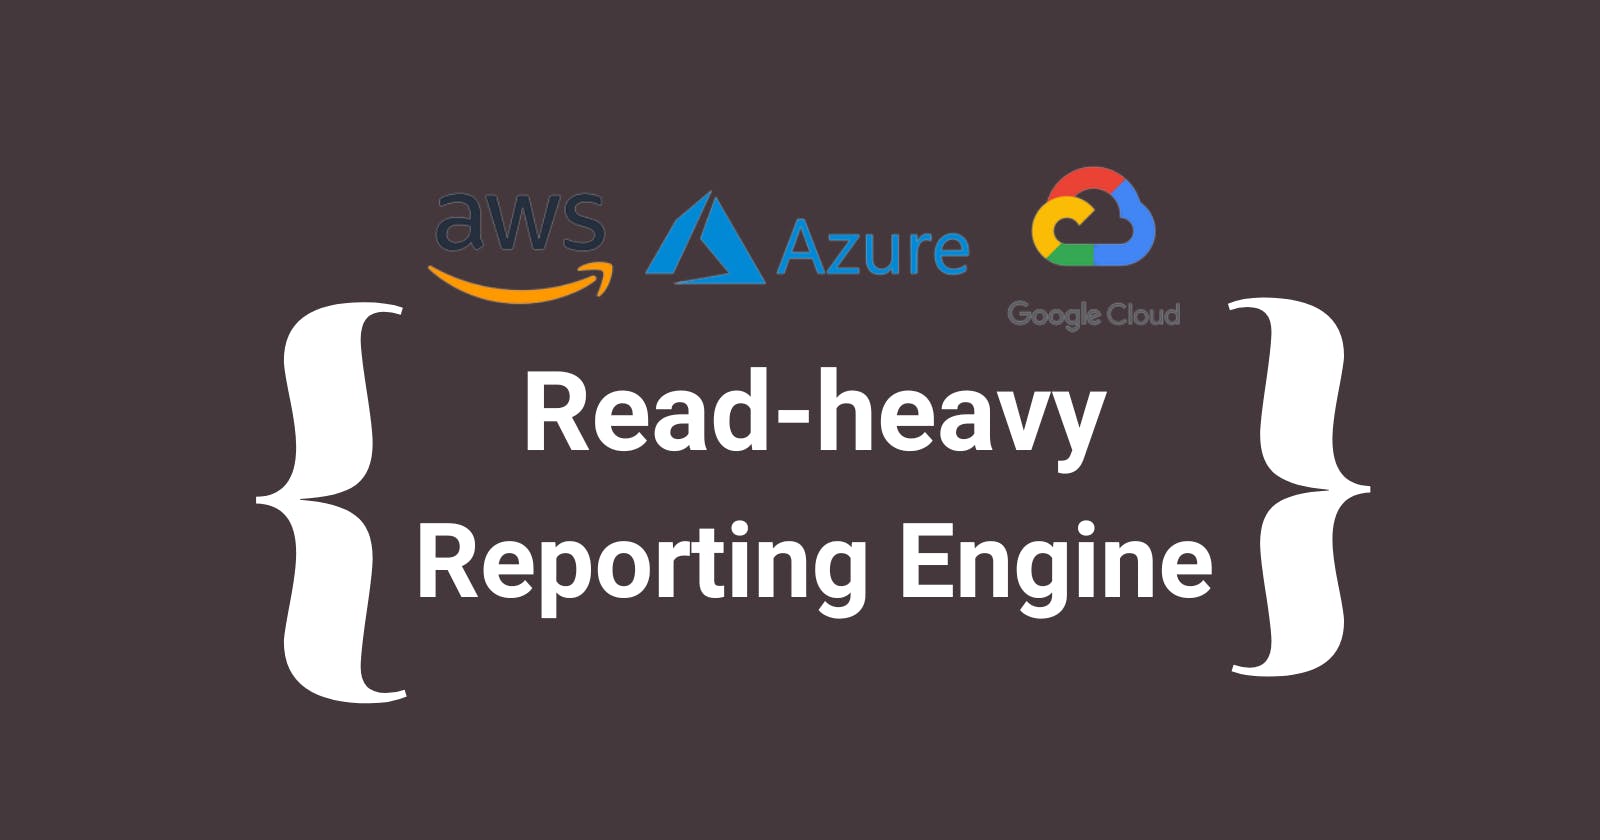 Read-heavy reporting engine Architecture Design Pattern on AWS